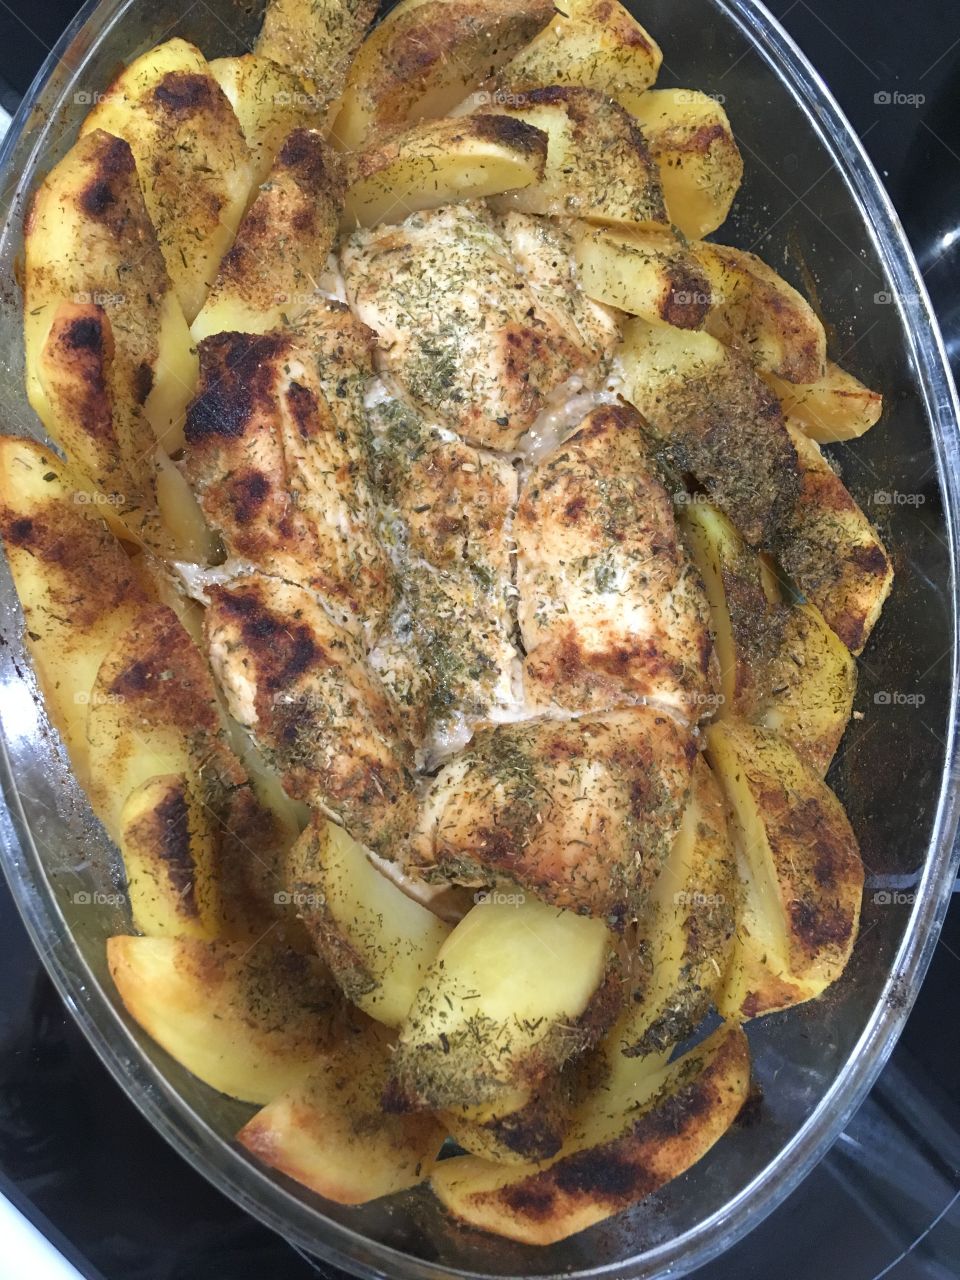 My diner : Chicken and potatoes 🥔